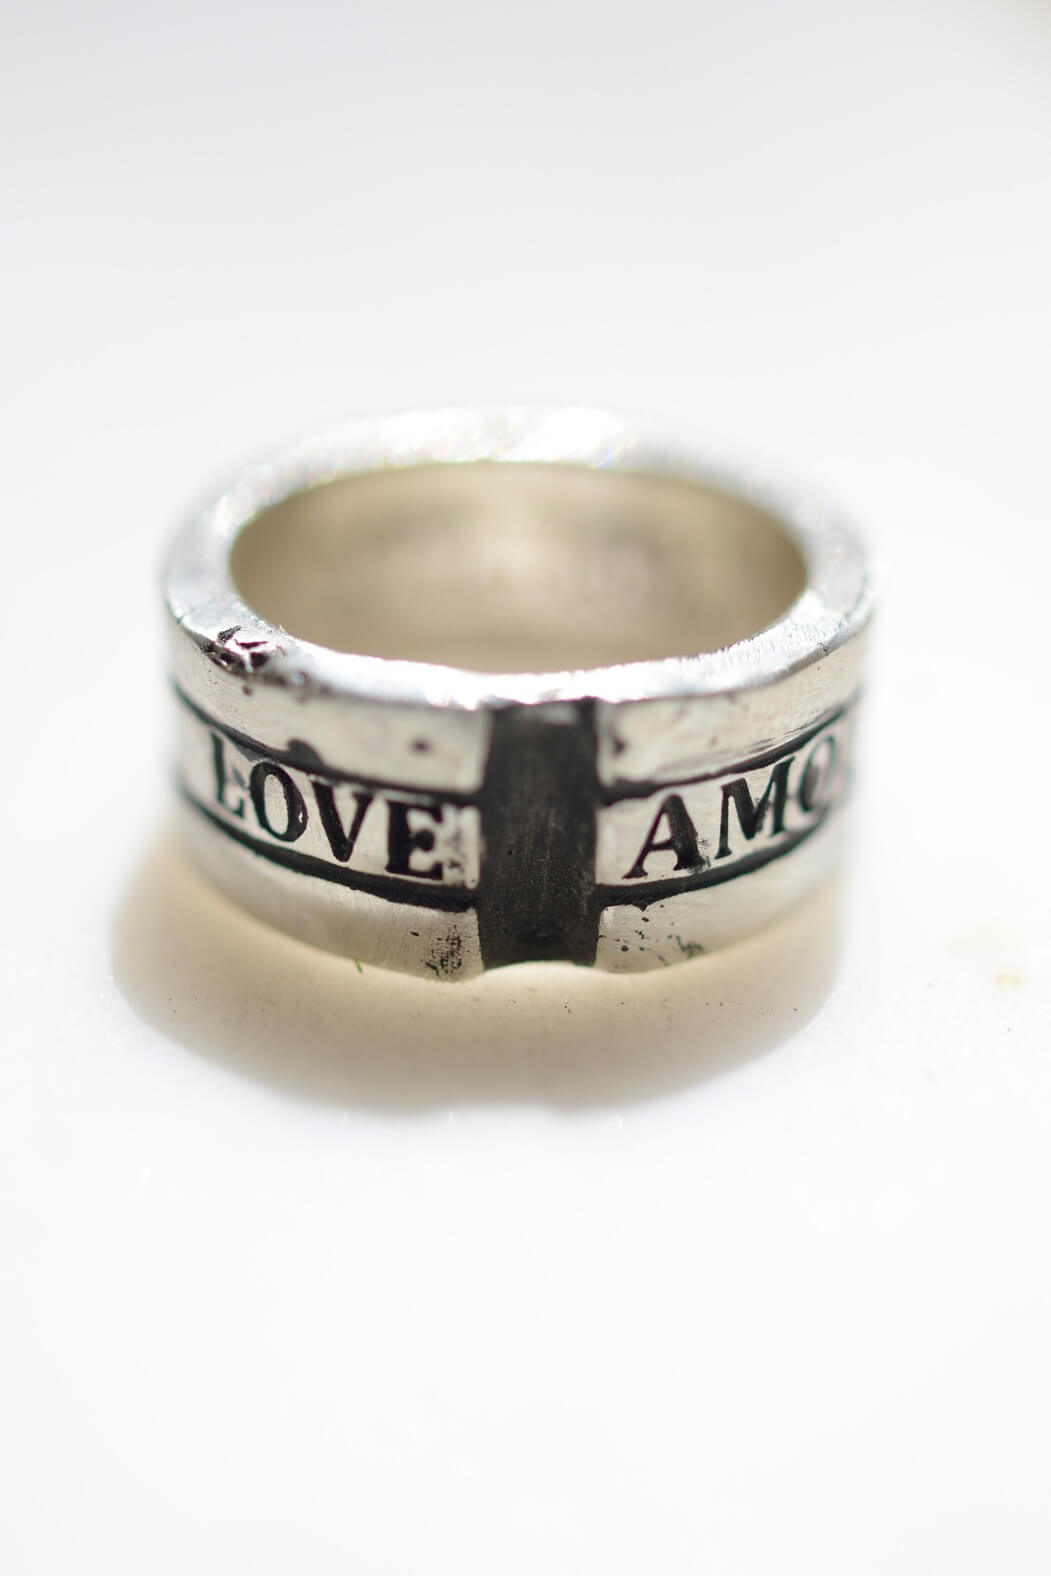 Montestruque love amour ring in sterling silver